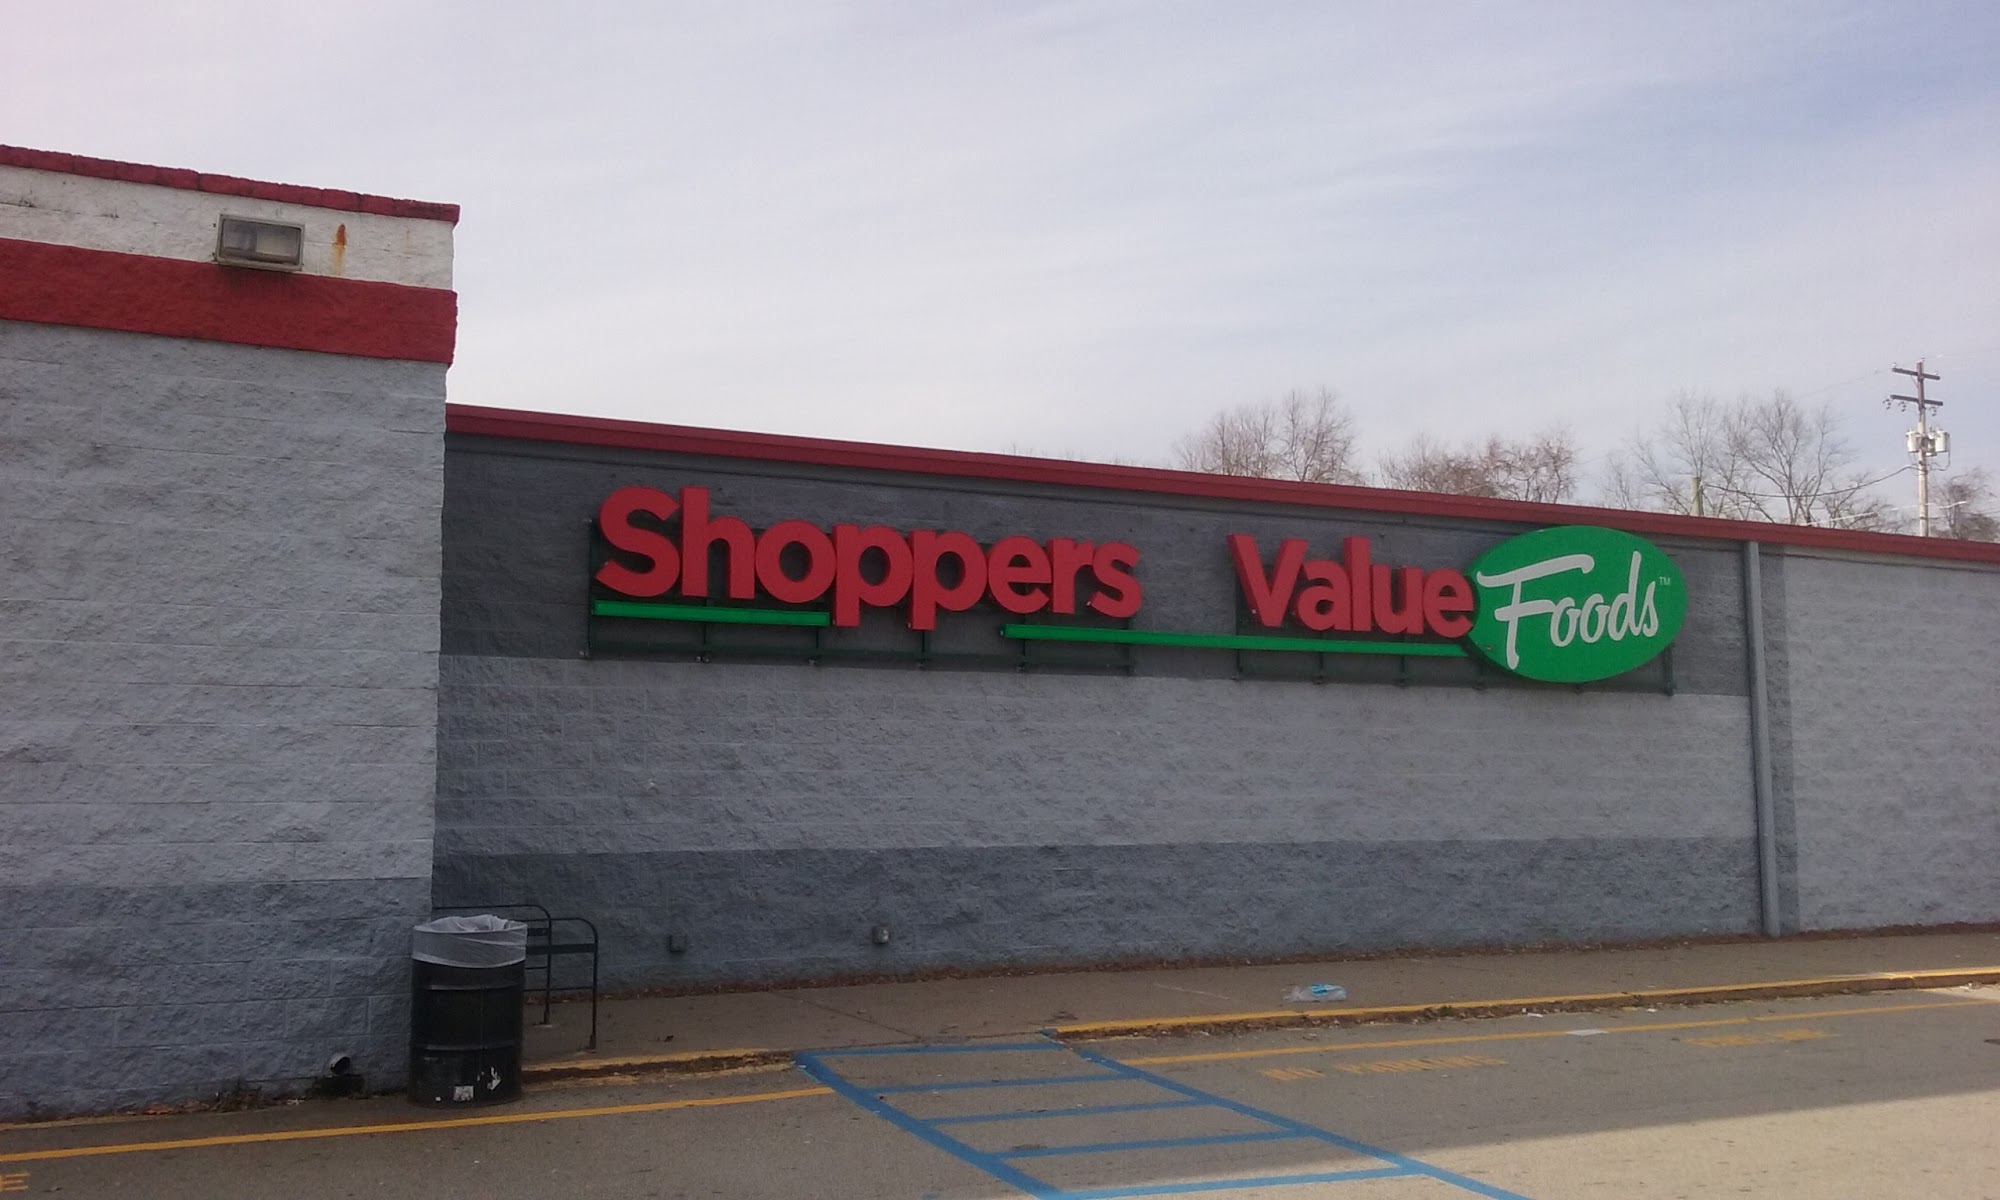 Shoppers Value Foods